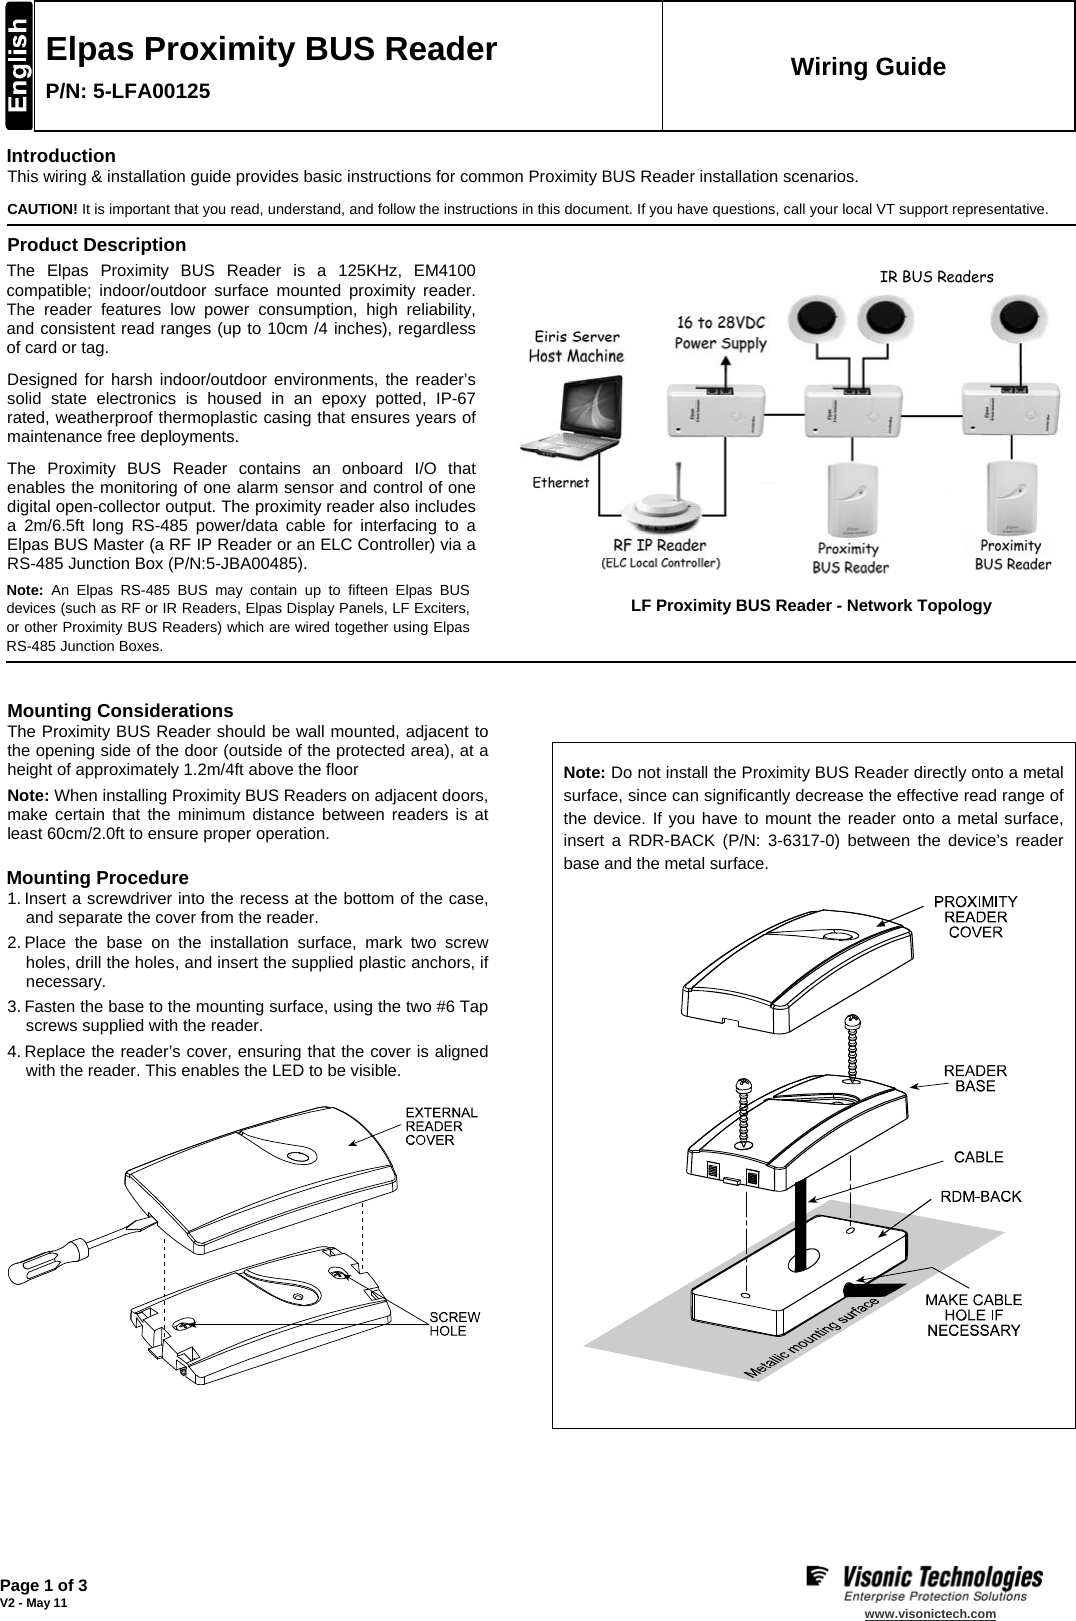   Page 1 of 3 V2 - May 11   www.visonictech.com   Elpas Proximity BUS Reader P/N: 5-LFA00125 Wiring Guide Introduction This wiring &amp; installation guide provides basic instructions for common Proximity BUS Reader installation scenarios. CAUTION! It is important that you read, understand, and follow the instructions in this document. If you have questions, call your local VT support representative. Product Description The Elpas Proximity BUS Reader is a 125KHz, EM4100 compatible; indoor/outdoor surface mounted proximity reader. The reader features low power consumption, high reliability, and consistent read ranges (up to 10cm /4 inches), regardless of card or tag. Designed for harsh indoor/outdoor environments, the reader’s solid state electronics is housed in an epoxy potted, IP-67 rated, weatherproof thermoplastic casing that ensures years of maintenance free deployments. The Proximity BUS Reader contains an onboard I/O that enables the monitoring of one alarm sensor and control of one digital open-collector output. The proximity reader also includes a 2m/6.5ft long RS-485 power/data cable for interfacing to a Elpas BUS Master (a RF IP Reader or an ELC Controller) via a RS-485 Junction Box (P/N:5-JBA00485). Note: An Elpas RS-485 BUS may contain up to fifteen Elpas BUS devices (such as RF or IR Readers, Elpas Display Panels, LF Exciters, or other Proximity BUS Readers) which are wired together using Elpas RS-485 Junction Boxes.           LF Proximity BUS Reader - Network Topology    Mounting Considerations The Proximity BUS Reader should be wall mounted, adjacent to the opening side of the door (outside of the protected area), at a height of approximately 1.2m/4ft above the floor Note: When installing Proximity BUS Readers on adjacent doors, make certain that the minimum distance between readers is at least 60cm/2.0ft to ensure proper operation. Mounting Procedure 1. Insert a screwdriver into the recess at the bottom of the case, and separate the cover from the reader. 2. Place the base on the installation surface, mark two screw holes, drill the holes, and insert the supplied plastic anchors, if necessary. 3. Fasten the base to the mounting surface, using the two #6 Tap screws supplied with the reader. 4. Replace the reader’s cover, ensuring that the cover is aligned with the reader. This enables the LED to be visible.          Note: Do not install the Proximity BUS Reader directly onto a metal surface, since can significantly decrease the effective read range of the device. If you have to mount the reader onto a metal surface, insert a RDR-BACK (P/N: 3-6317-0) between the device’s reader base and the metal surface.           